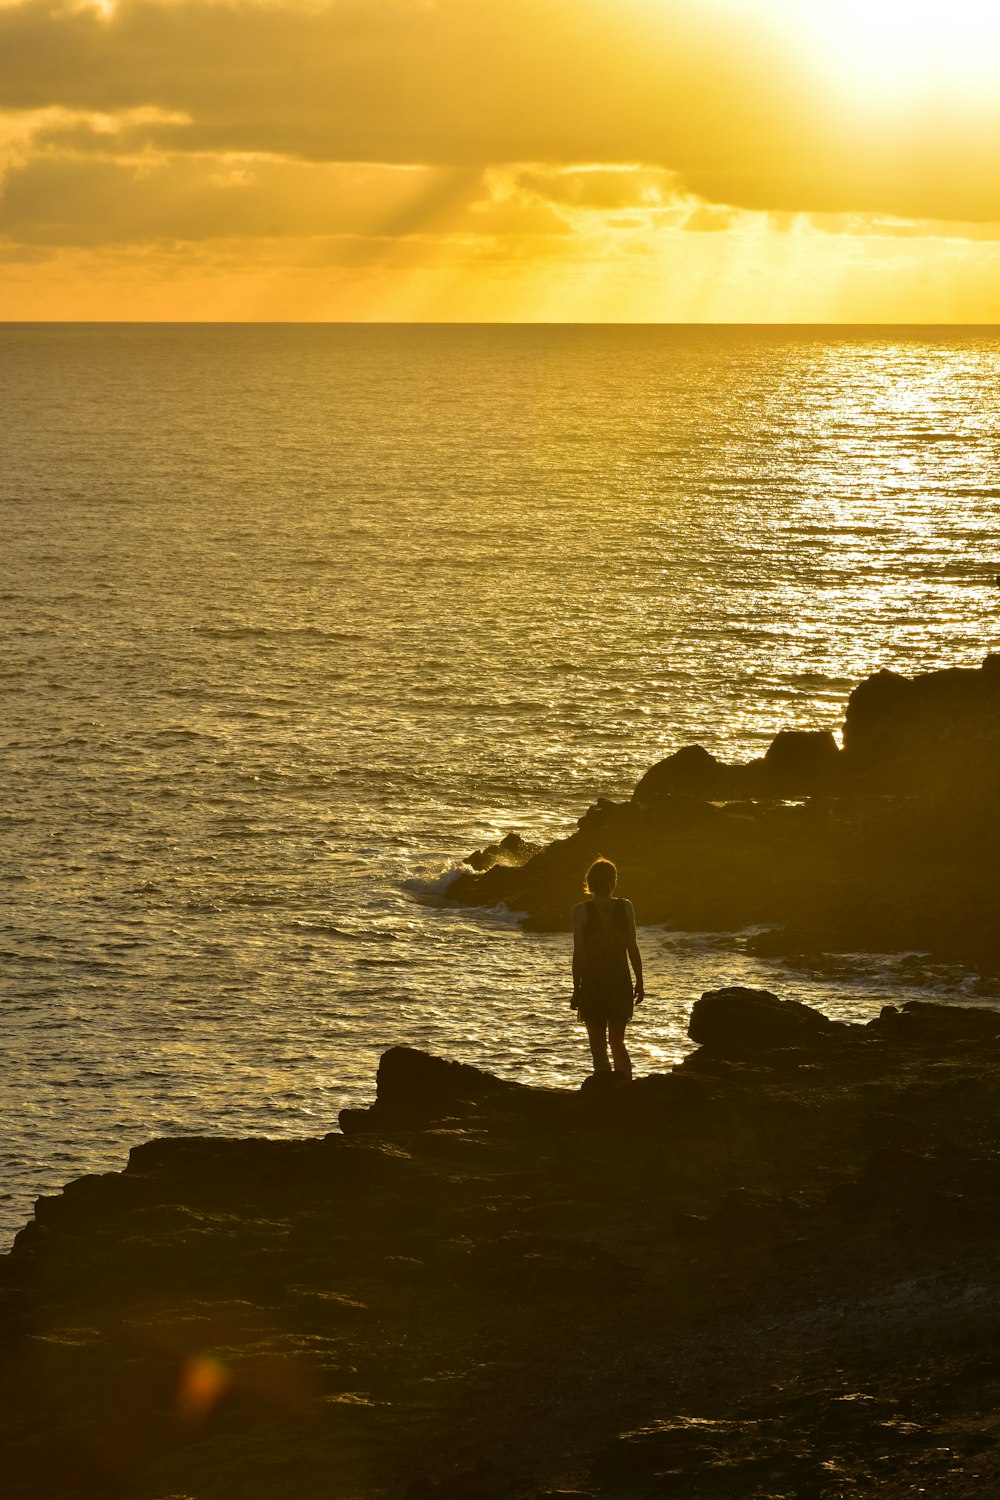 a person standing on a rocky cliff near the ocean